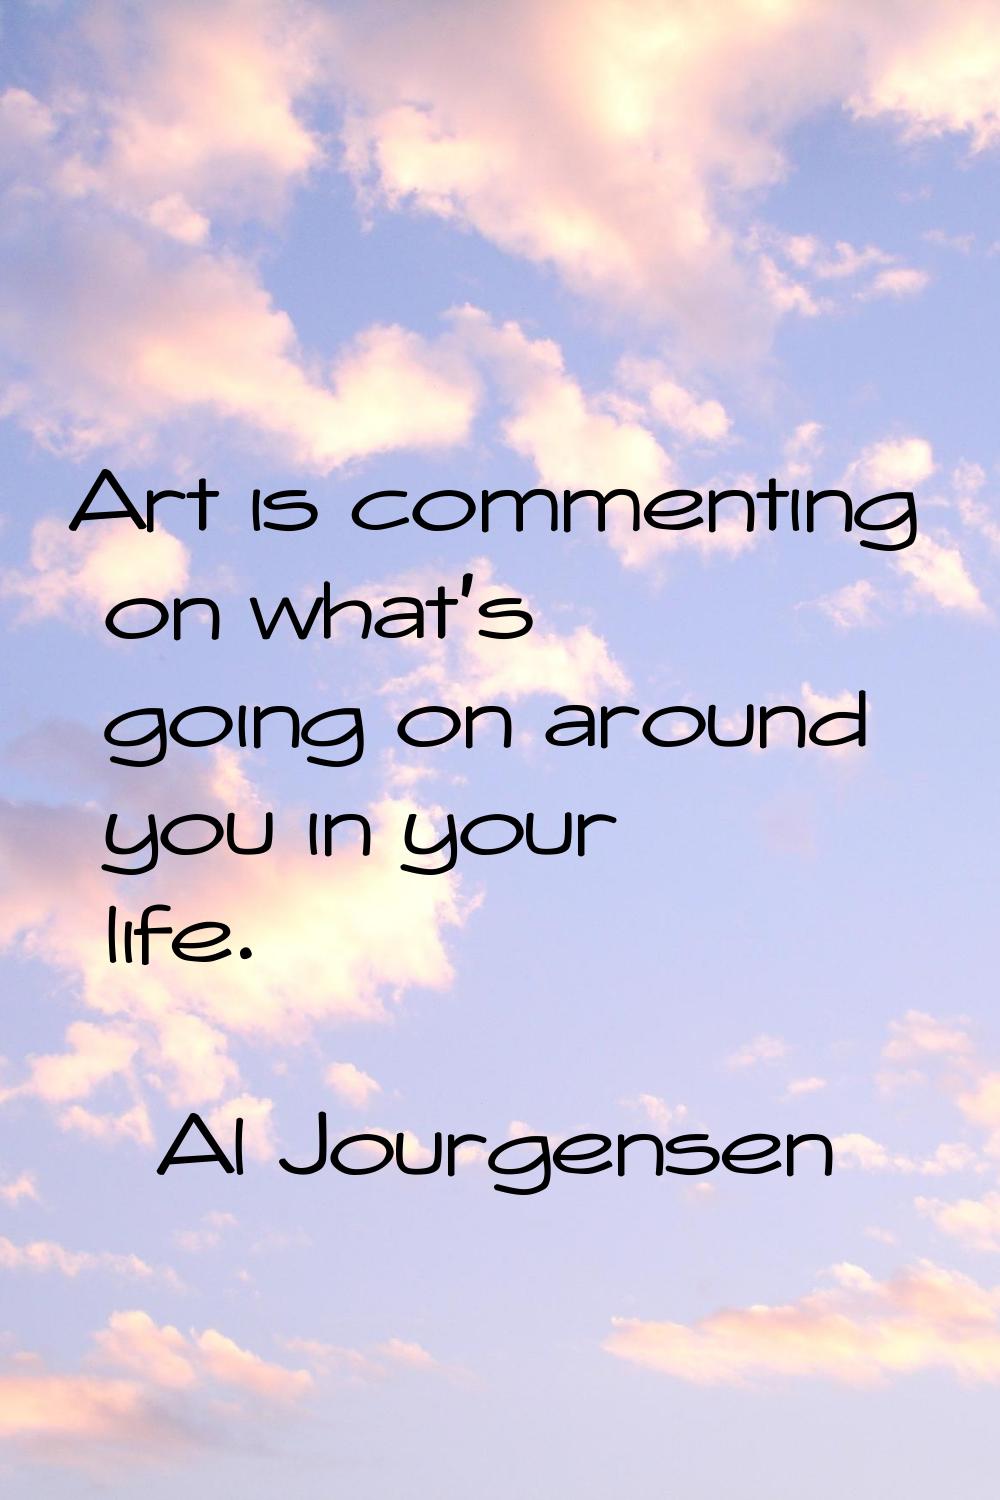 Art is commenting on what's going on around you in your life.